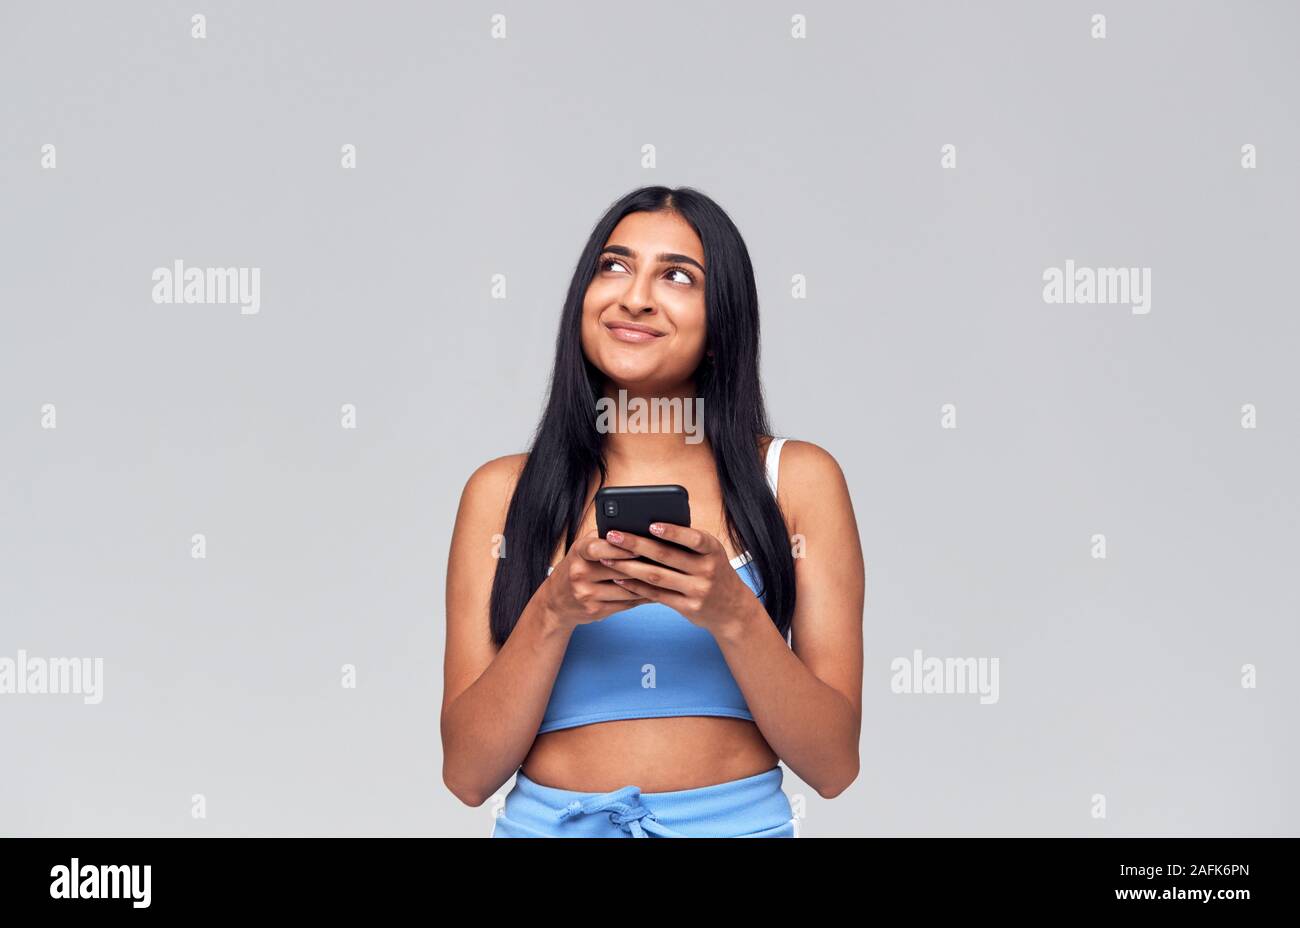 Studio Shot Of Causally Dressed Young Woman Using Mobile Phone Looking Off Camera Stock Photo